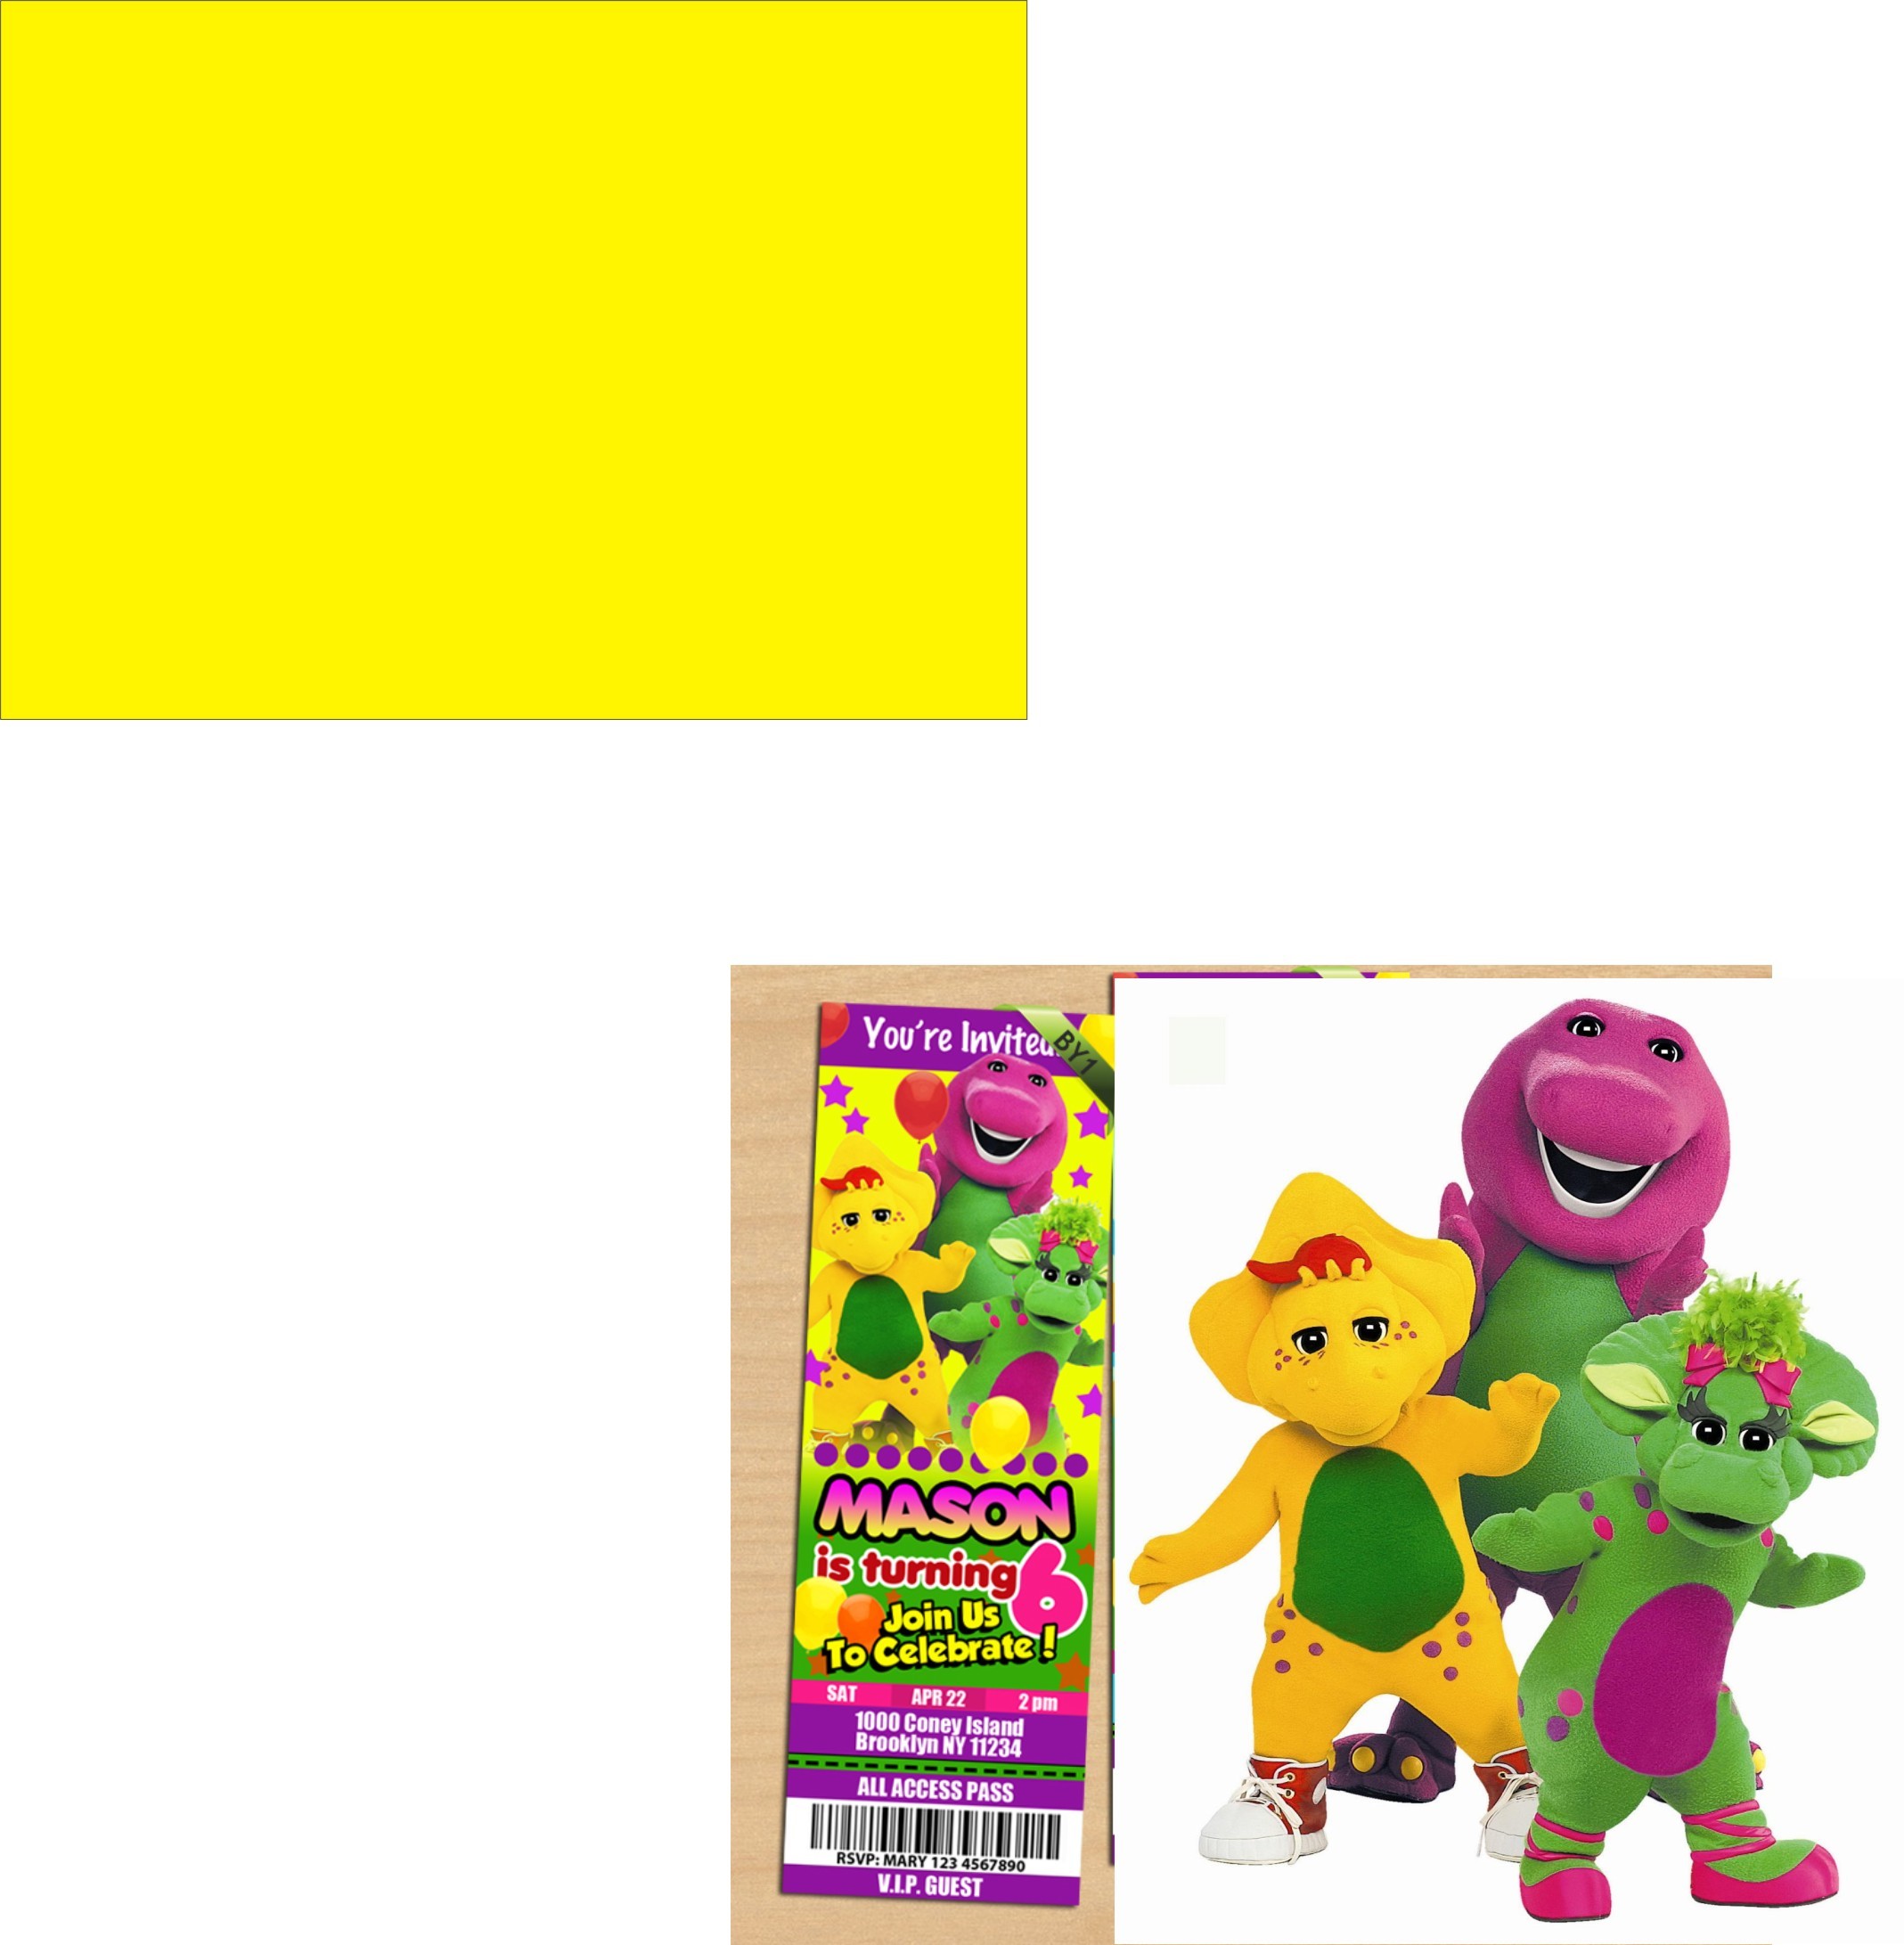 2137x2183 Barney & Friends images barney background HD wallpaper and background photos